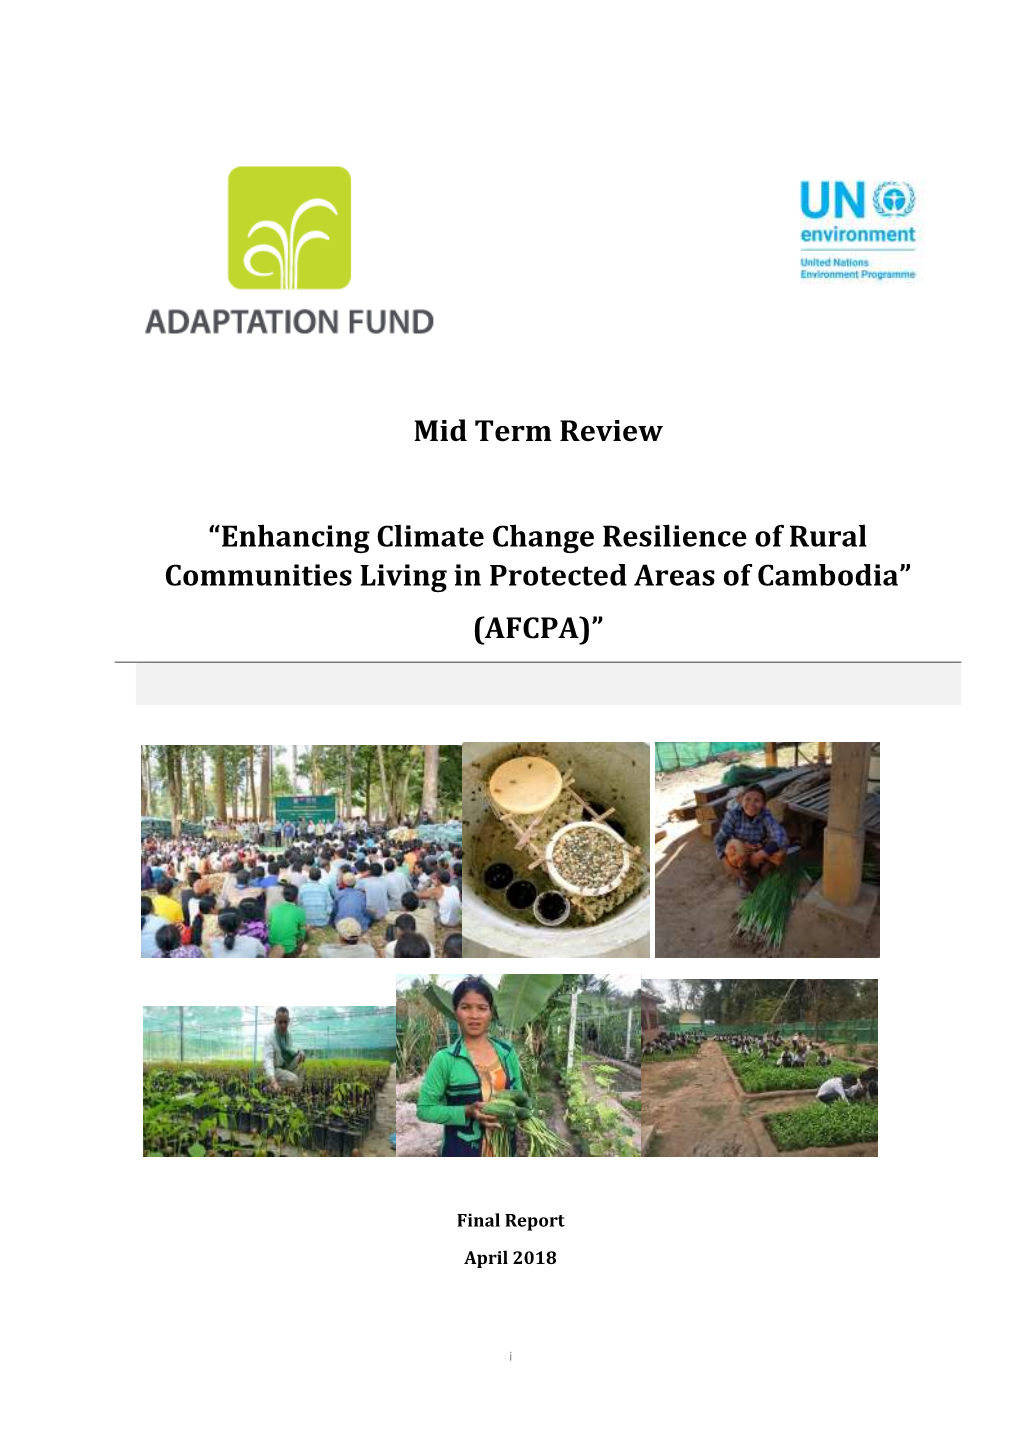 Mid Term Review “Enhancing Climate Change Resilience of Rural